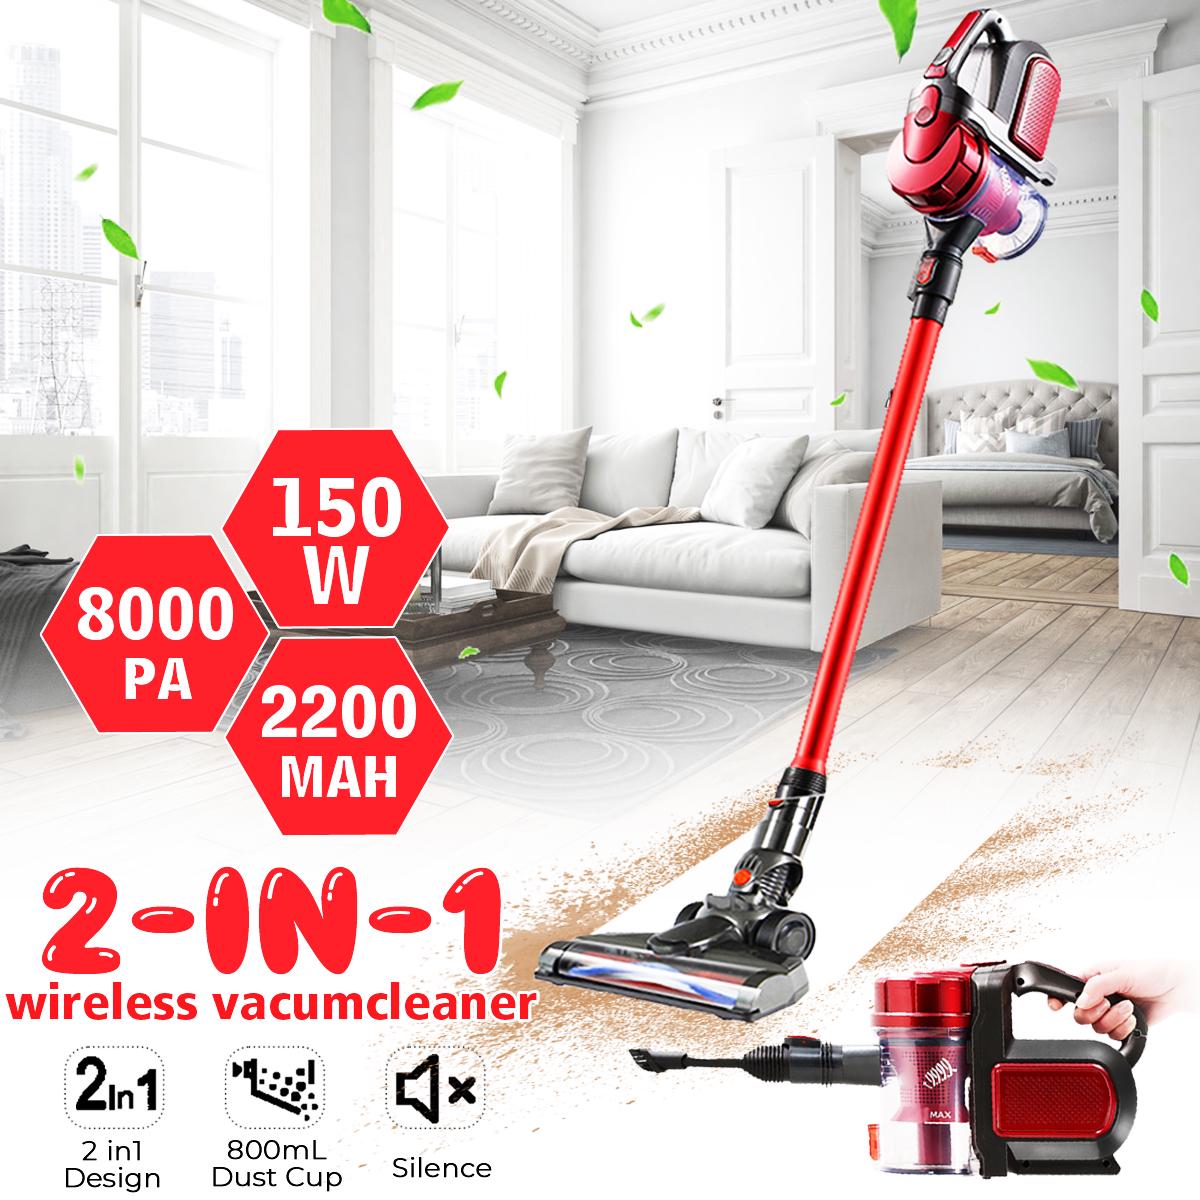 Vacuum Cleaner For Home Portable Wireless Suction Carpet Sweep Dust Collector Handheld Cordless